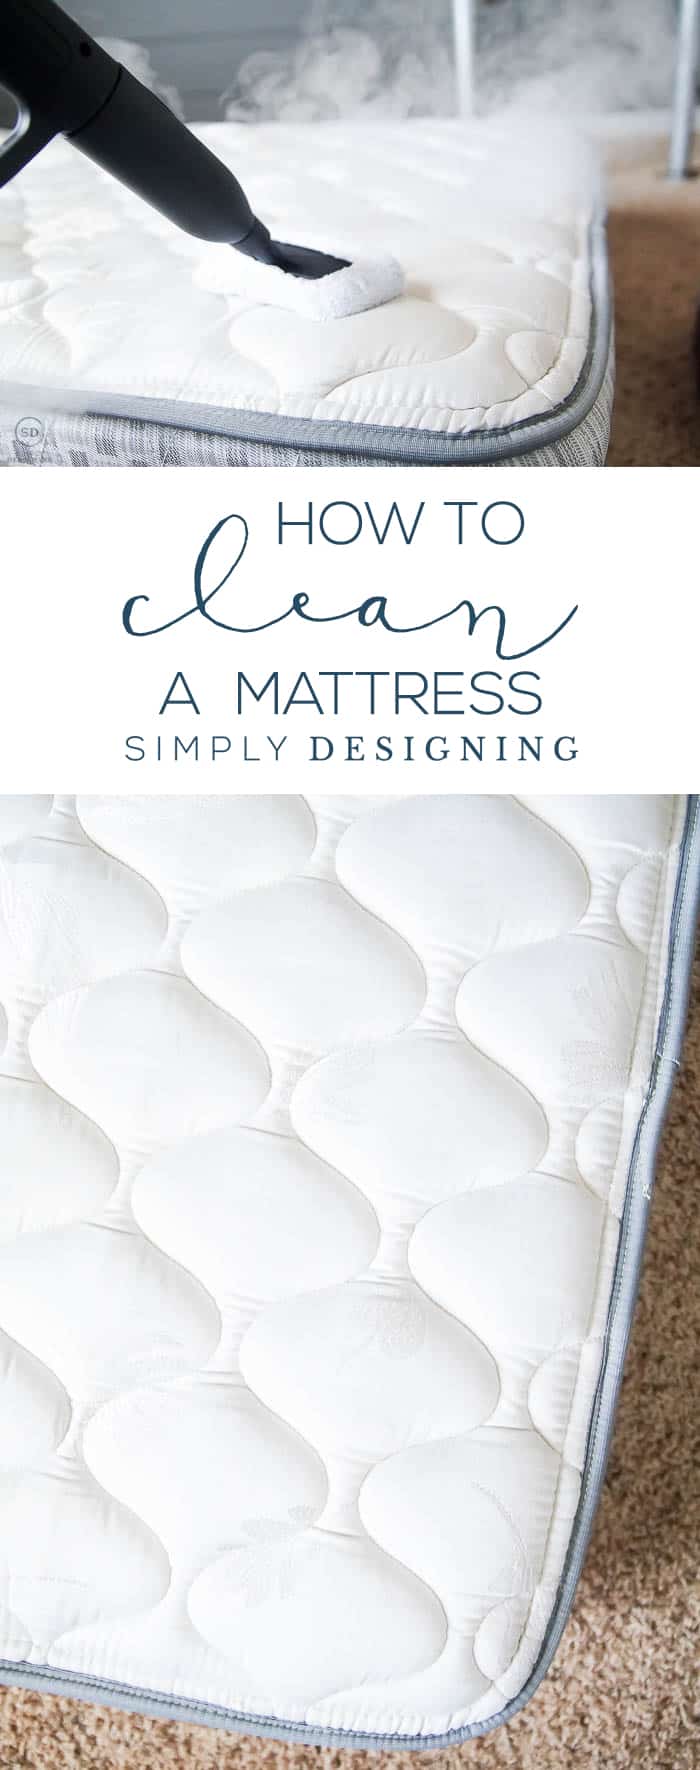 How to Clean a Mattress  Simply Designing with Ashley